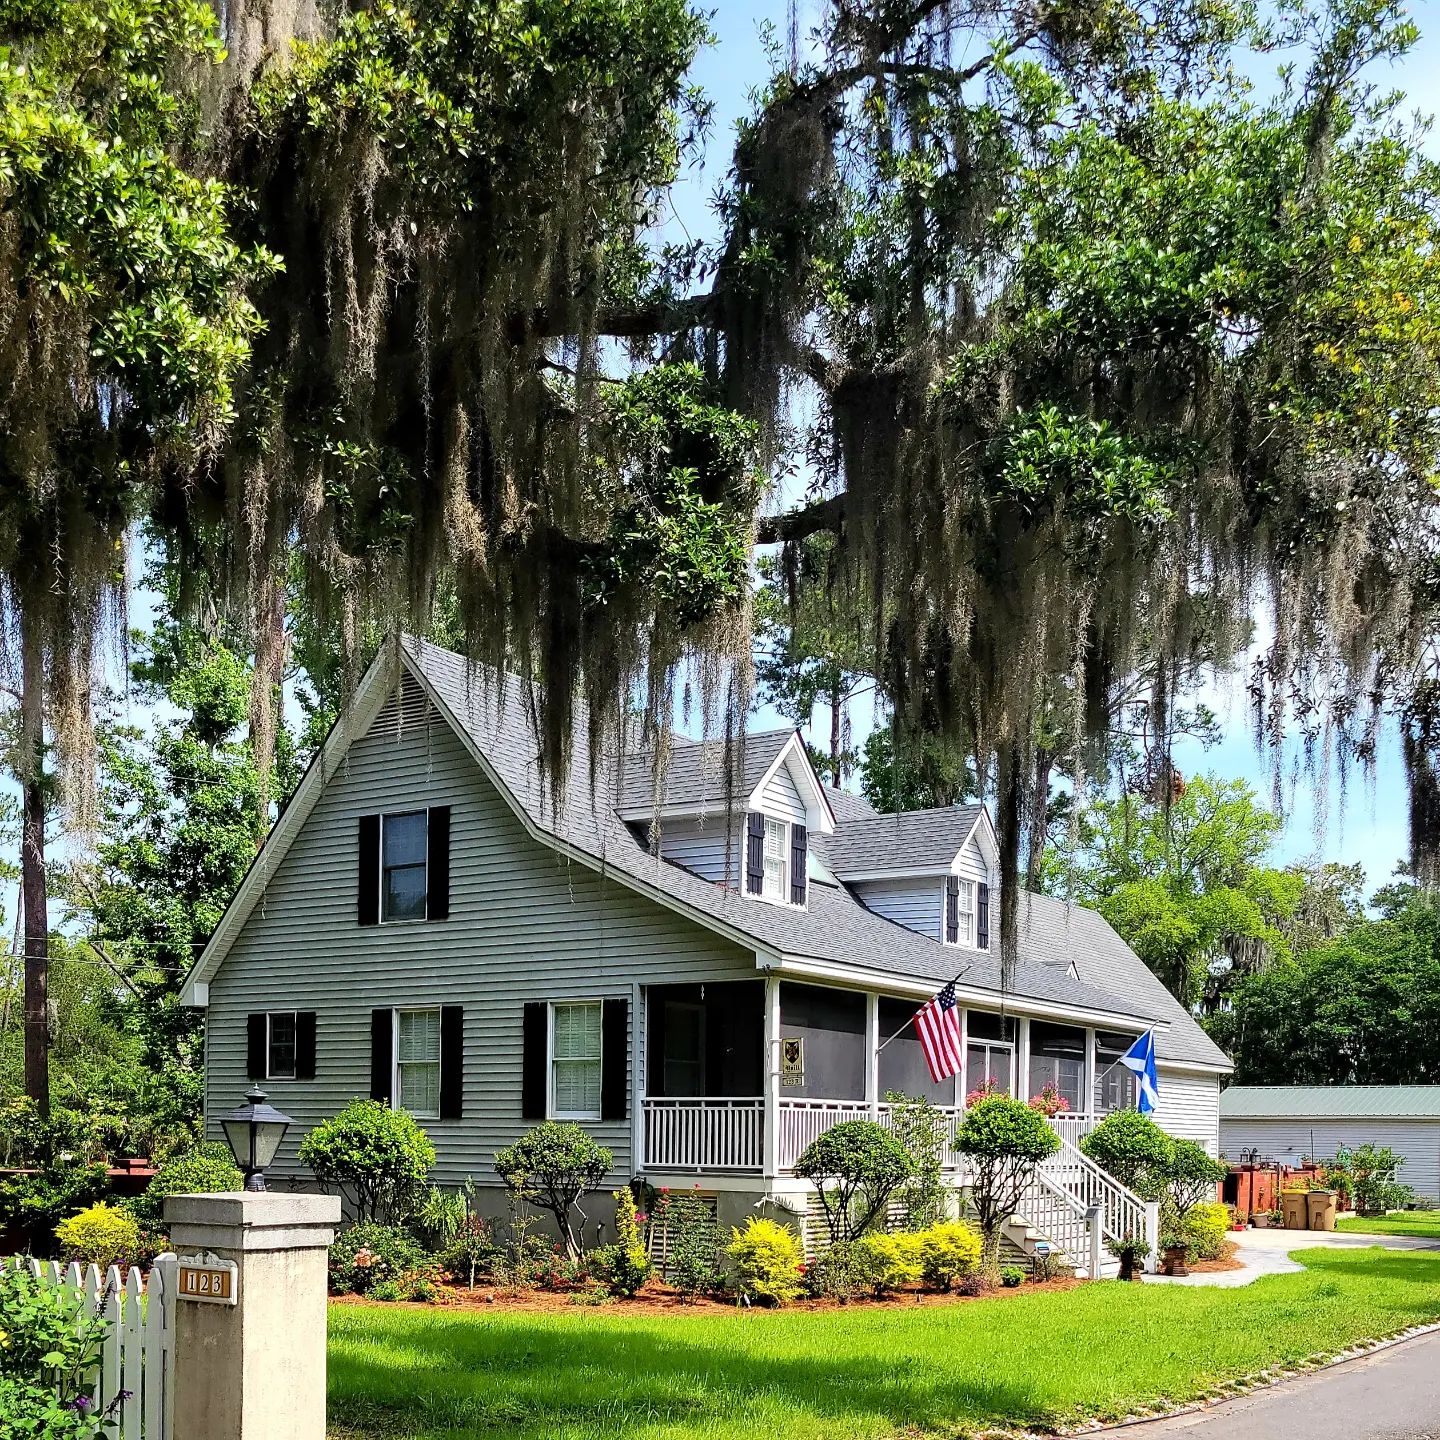 A gray Georgian home surrounded by trees covered in hanging Spanish moss. Photo by Instagram user @edgerlyrobert.